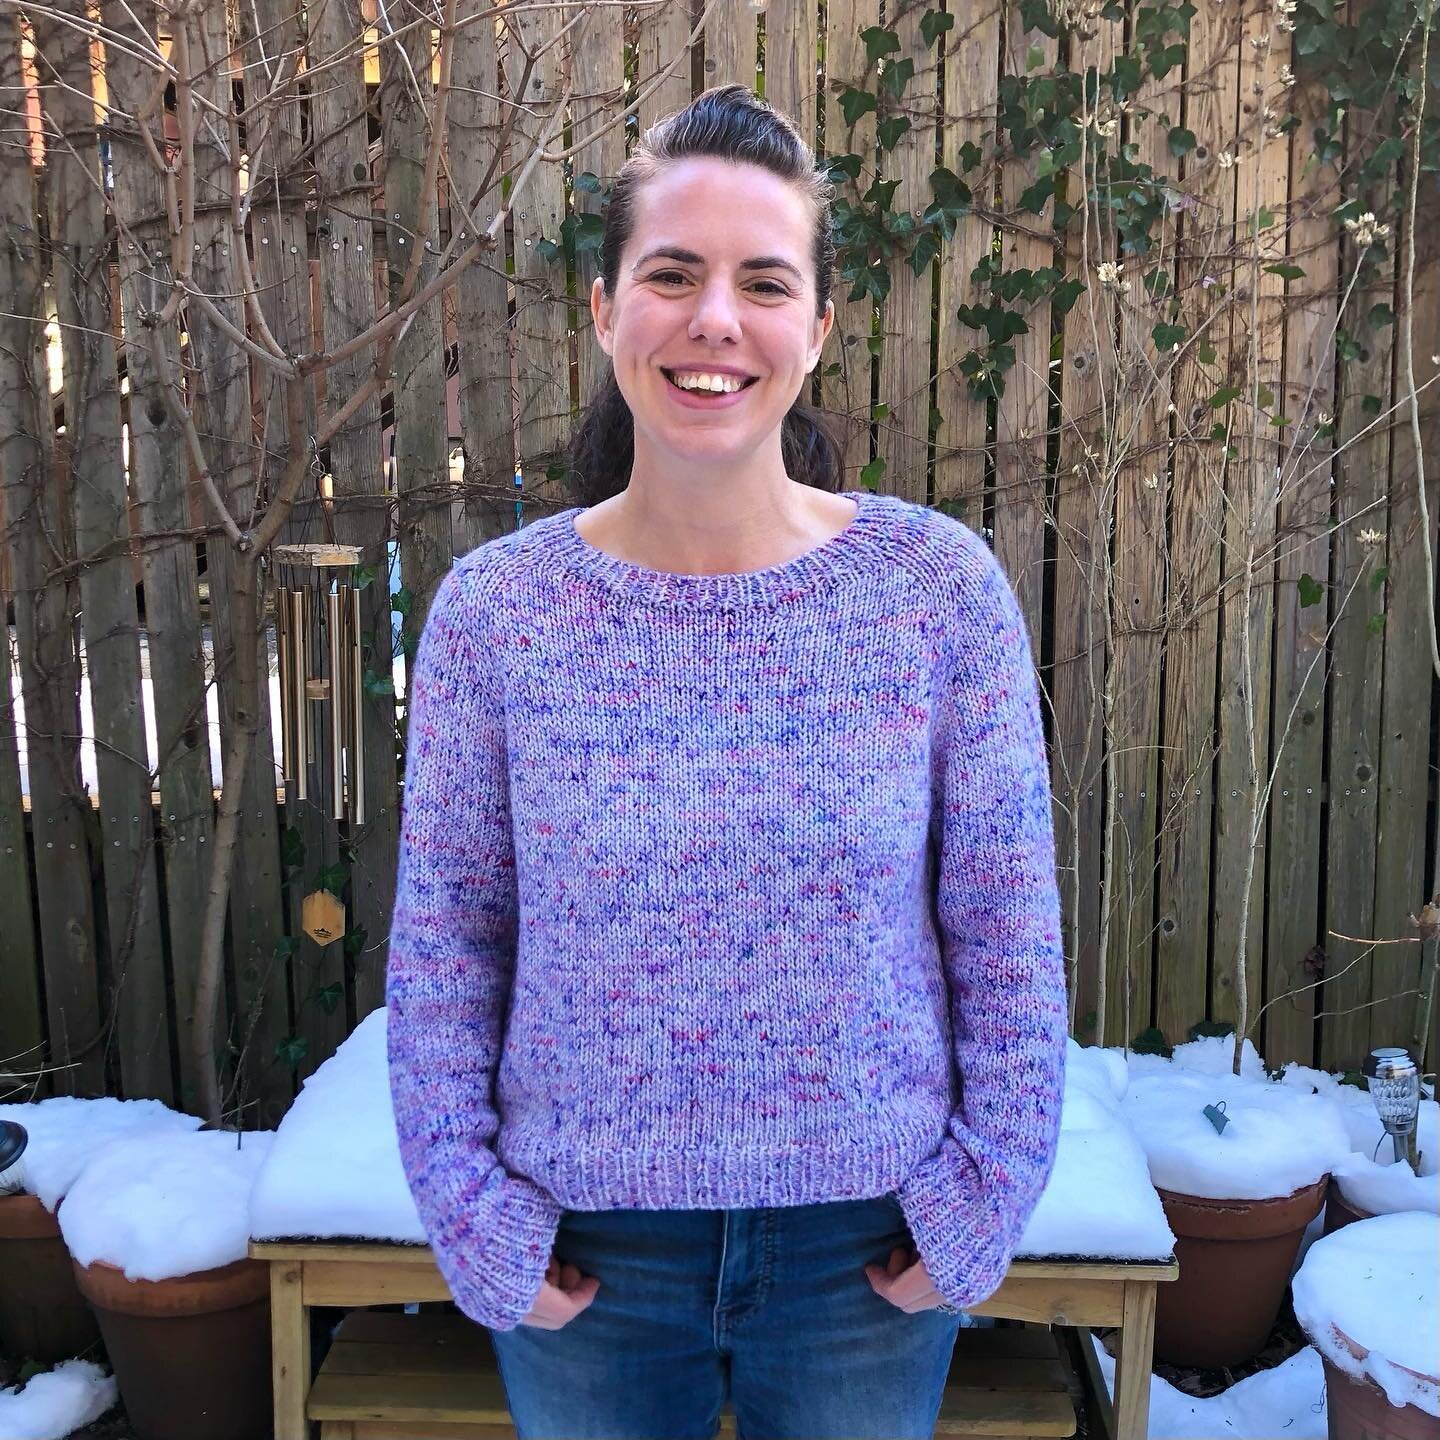 Second recently finished sweater! 🙌 This #doppiosweater by @seungheeknits is a dream raglan pattern &mdash; I get very frustrated with poorly written raglans with too-deep yokes and bunching in the upper arms. This pattern has none of that thanks to